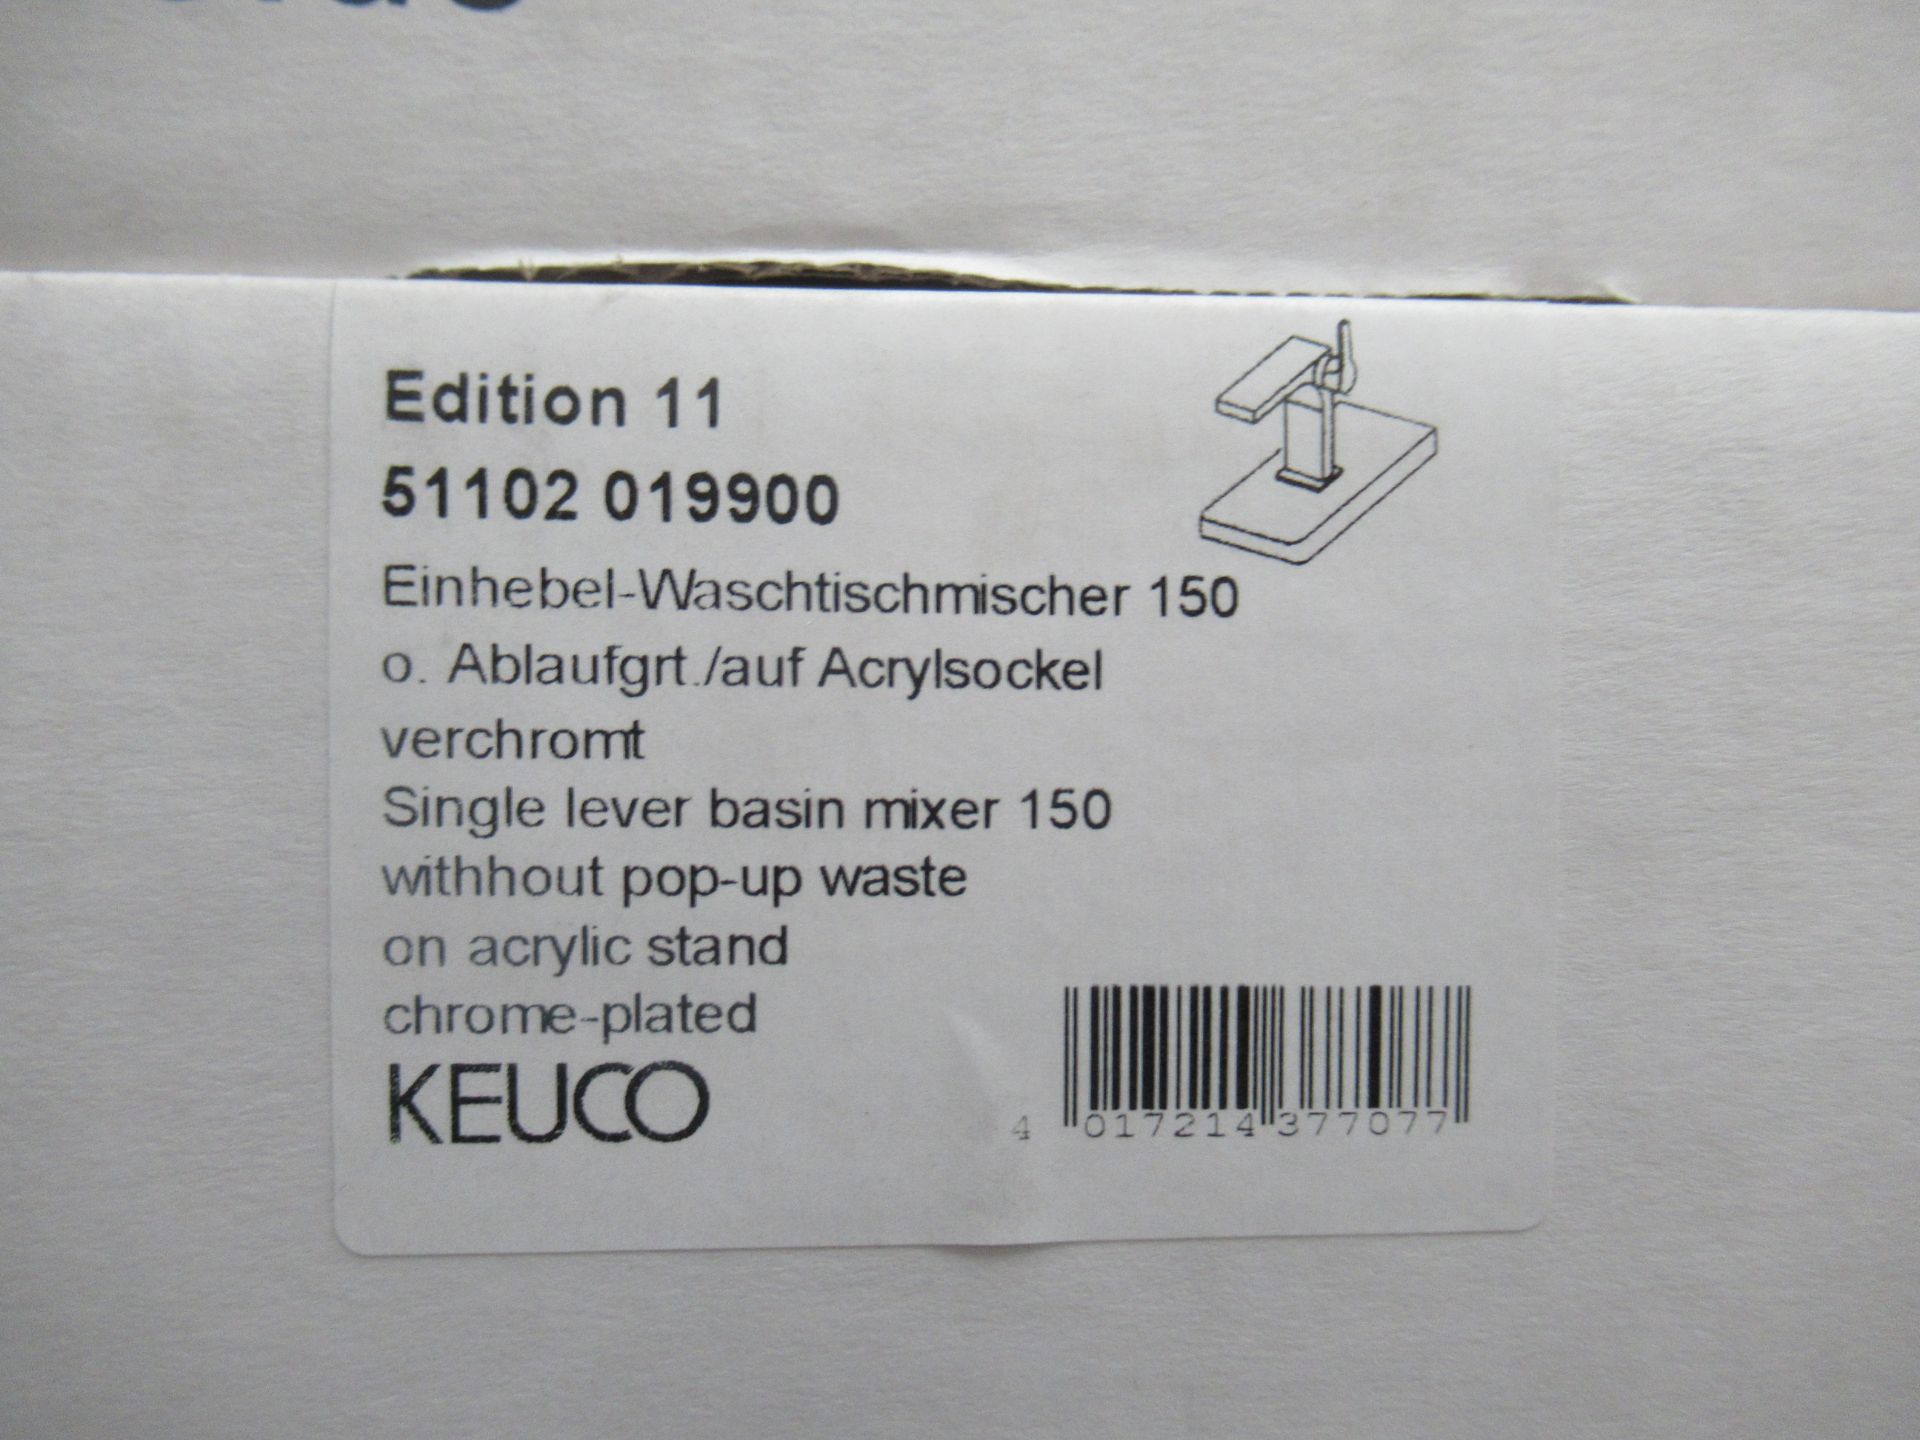 2 x Keuco Edition II Single Lever Basin Mixer 150-Tap, Chrome Plated, P/N 51102-019900 - Image 2 of 3